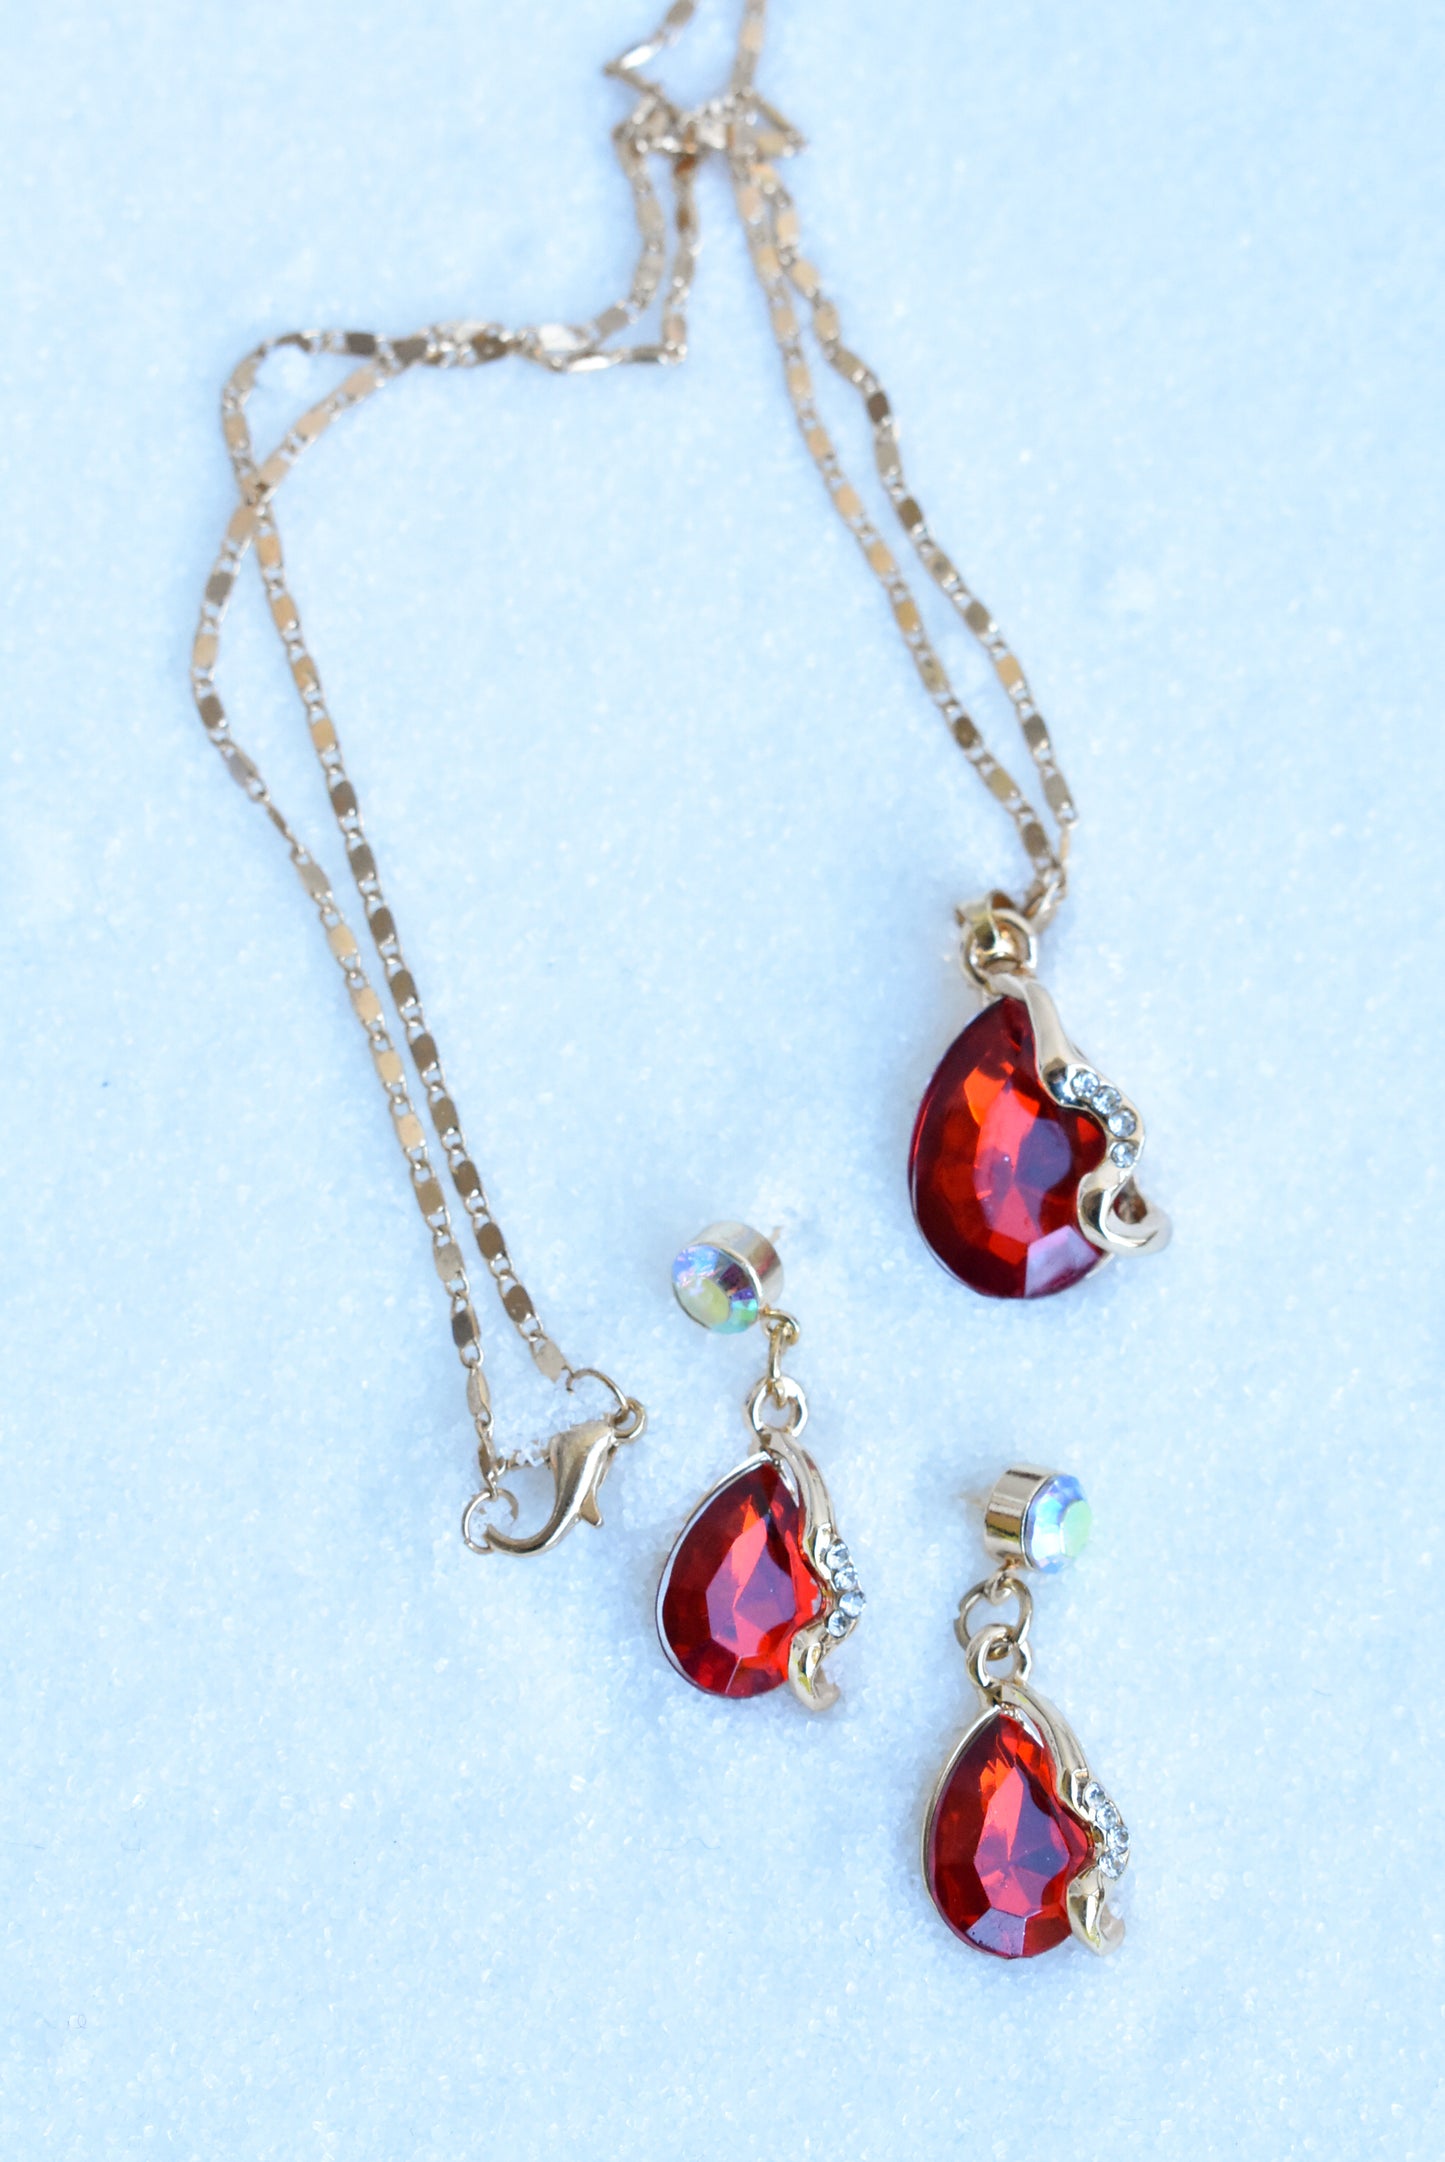 Golden and red jewelled necklace and earrings set